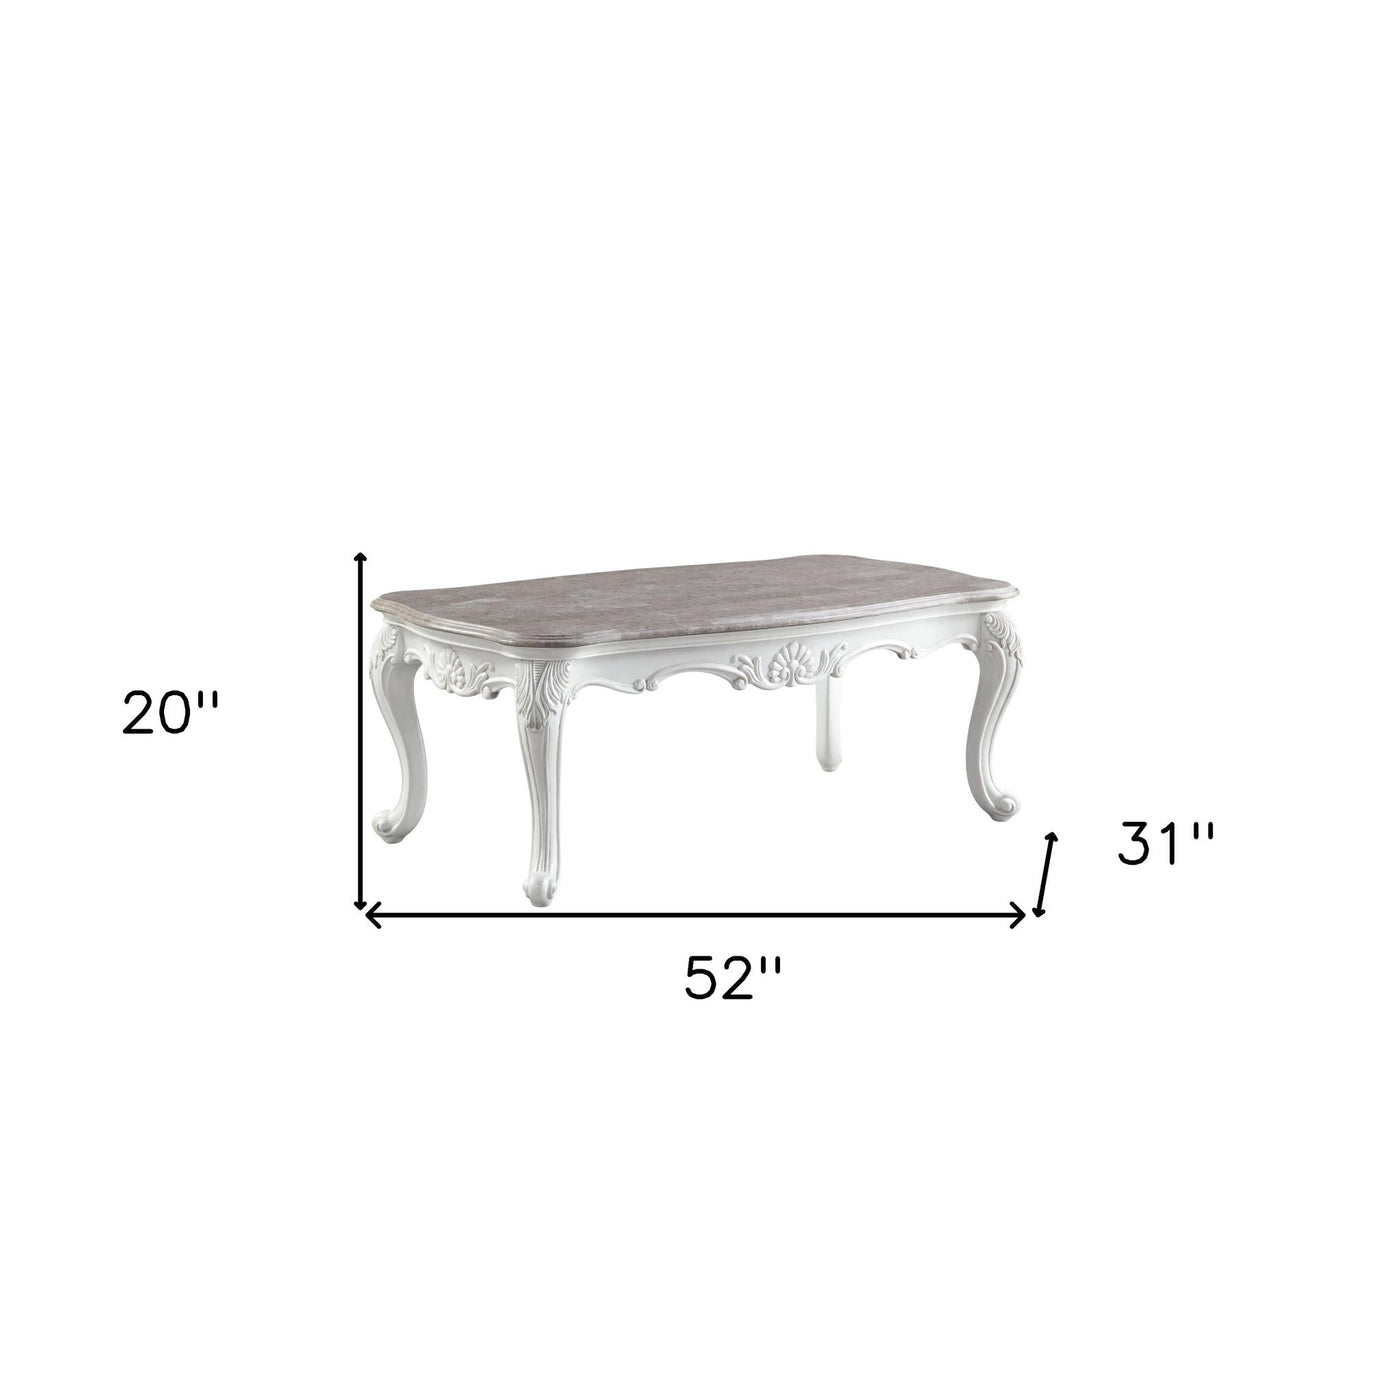 52’ White And Marble Faux Marble Rectangular Coffee Table - Coffee Tables